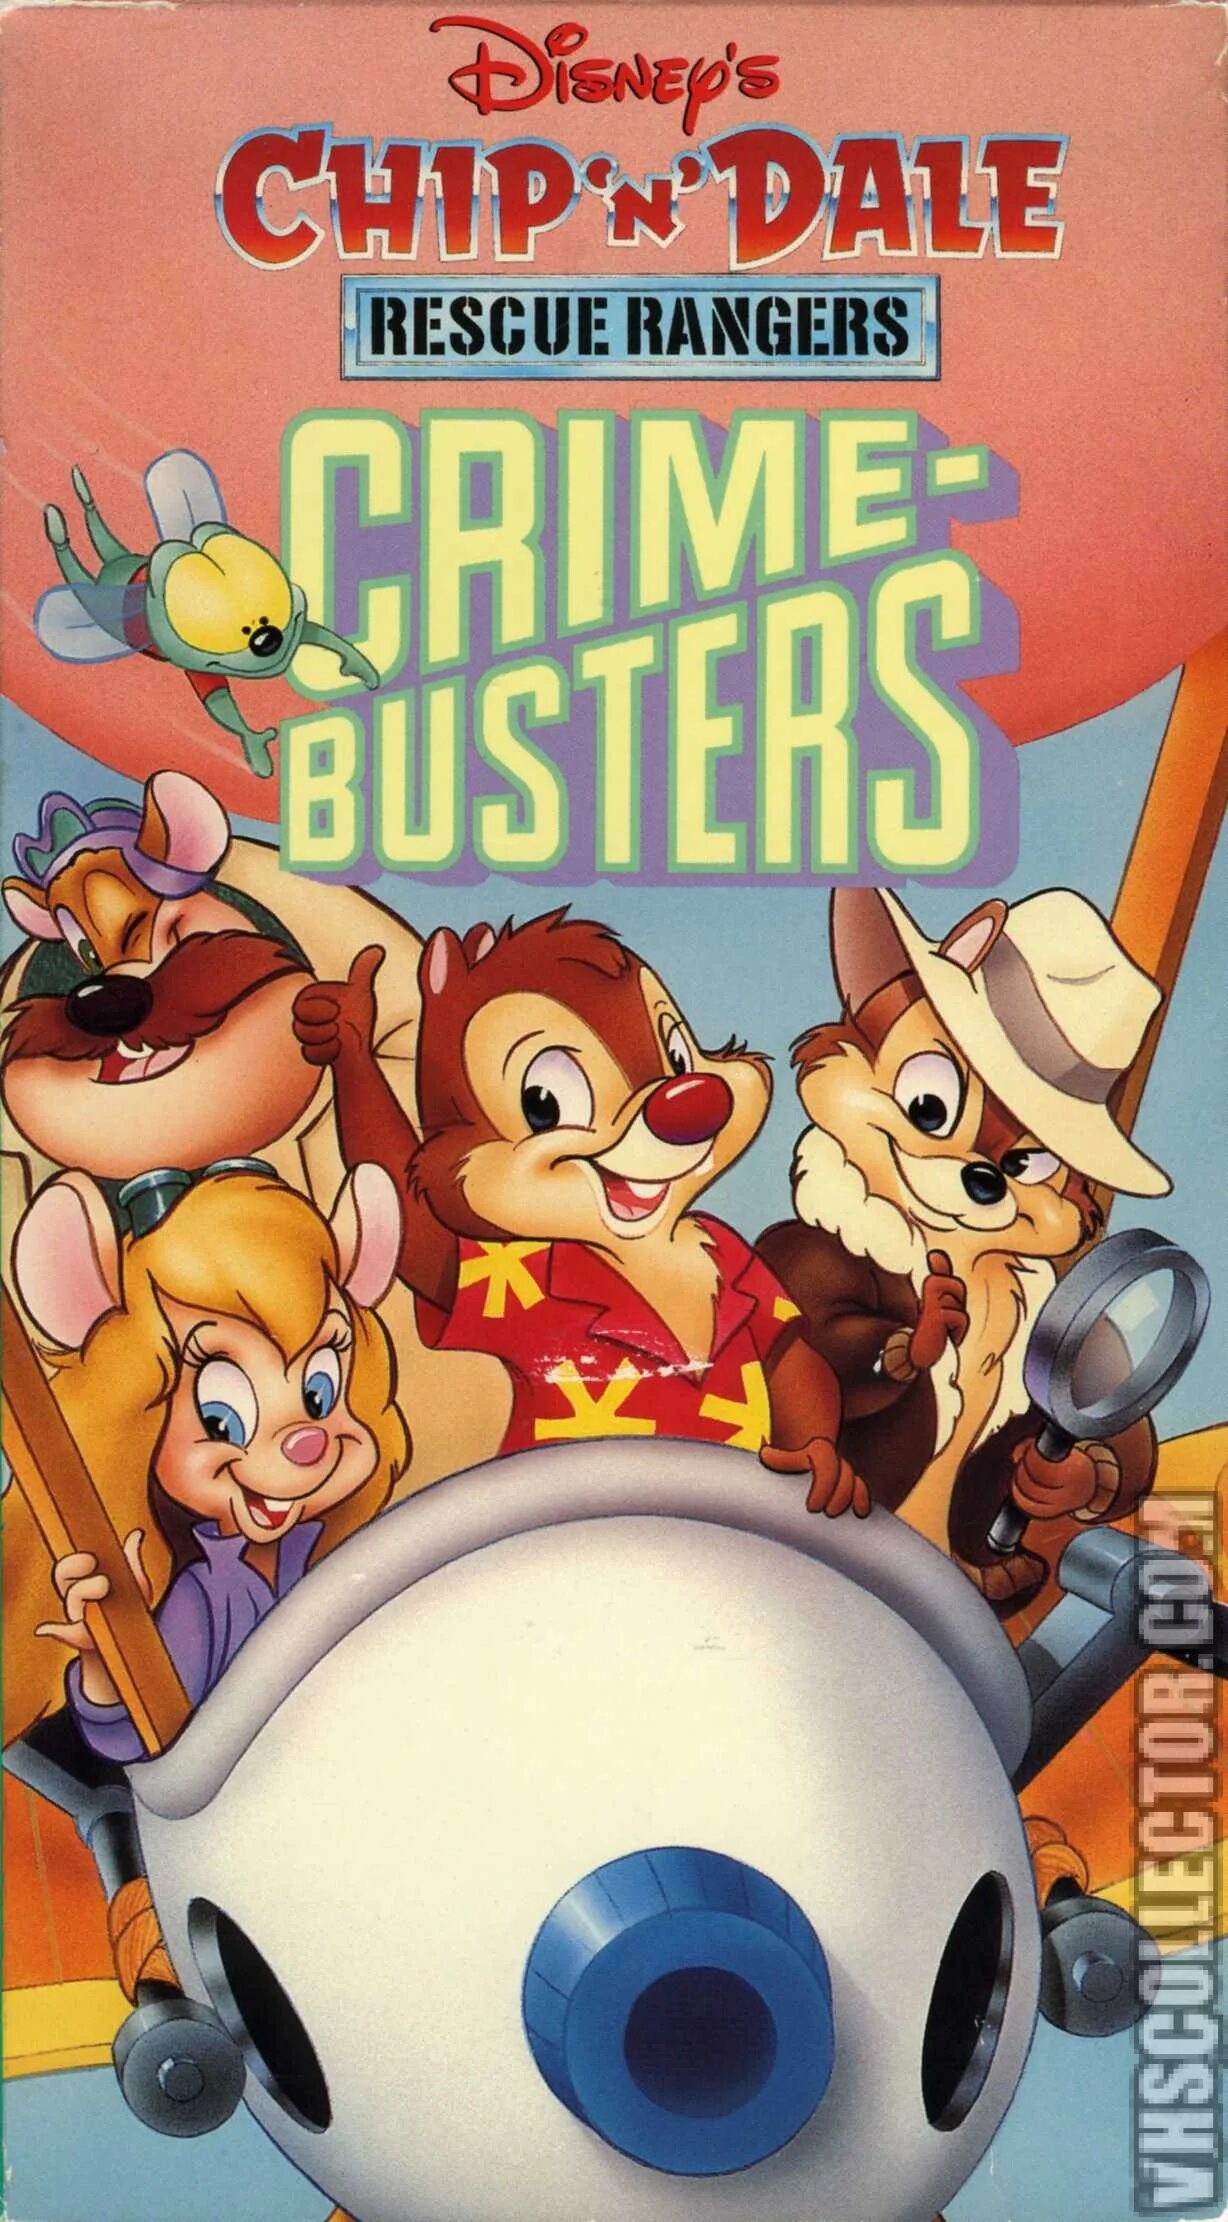 Chip ’n Dale Rescue Rangers. Чип и Дейл 1987. Чип и Дейл Постер. Чип и Дейл Дисней. Chip n dale theme